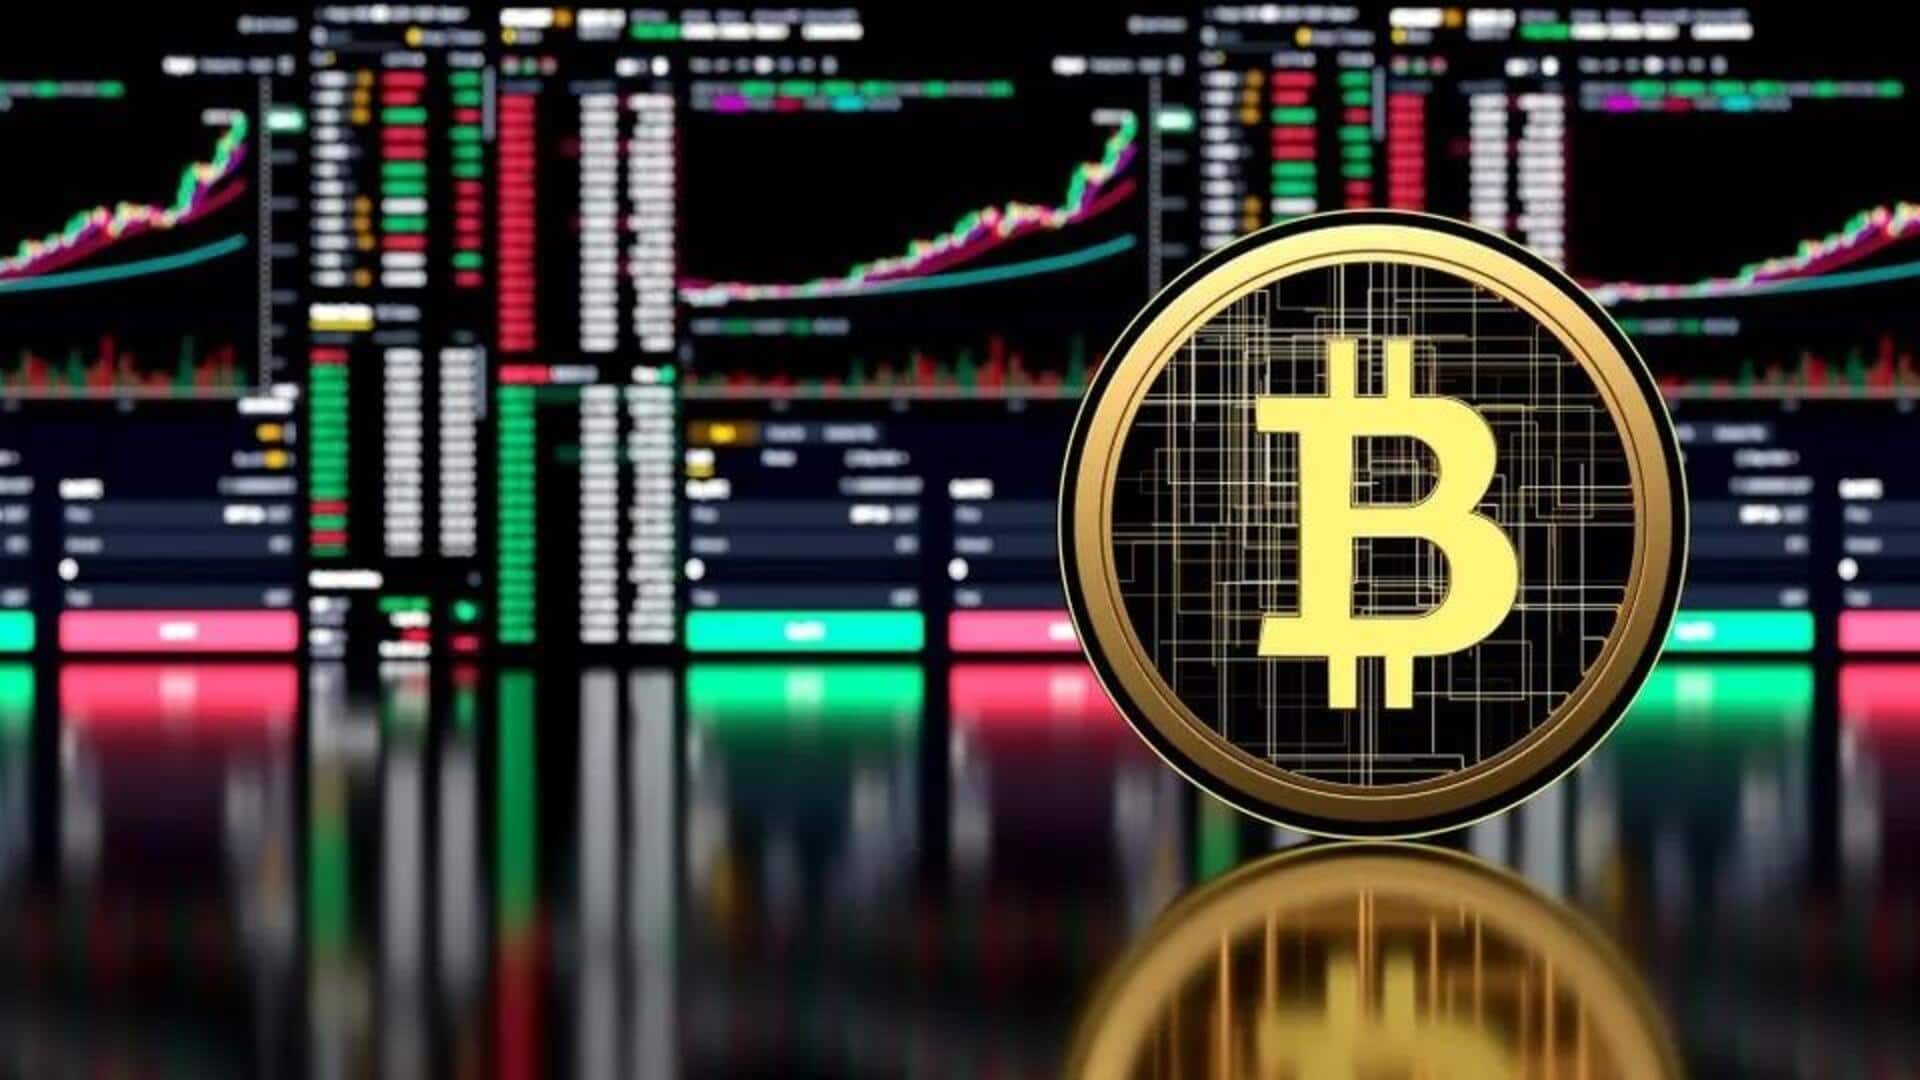 Cryptocurrency prices today: Check rates of Bitcoin, Ethereum, BNB, Solana